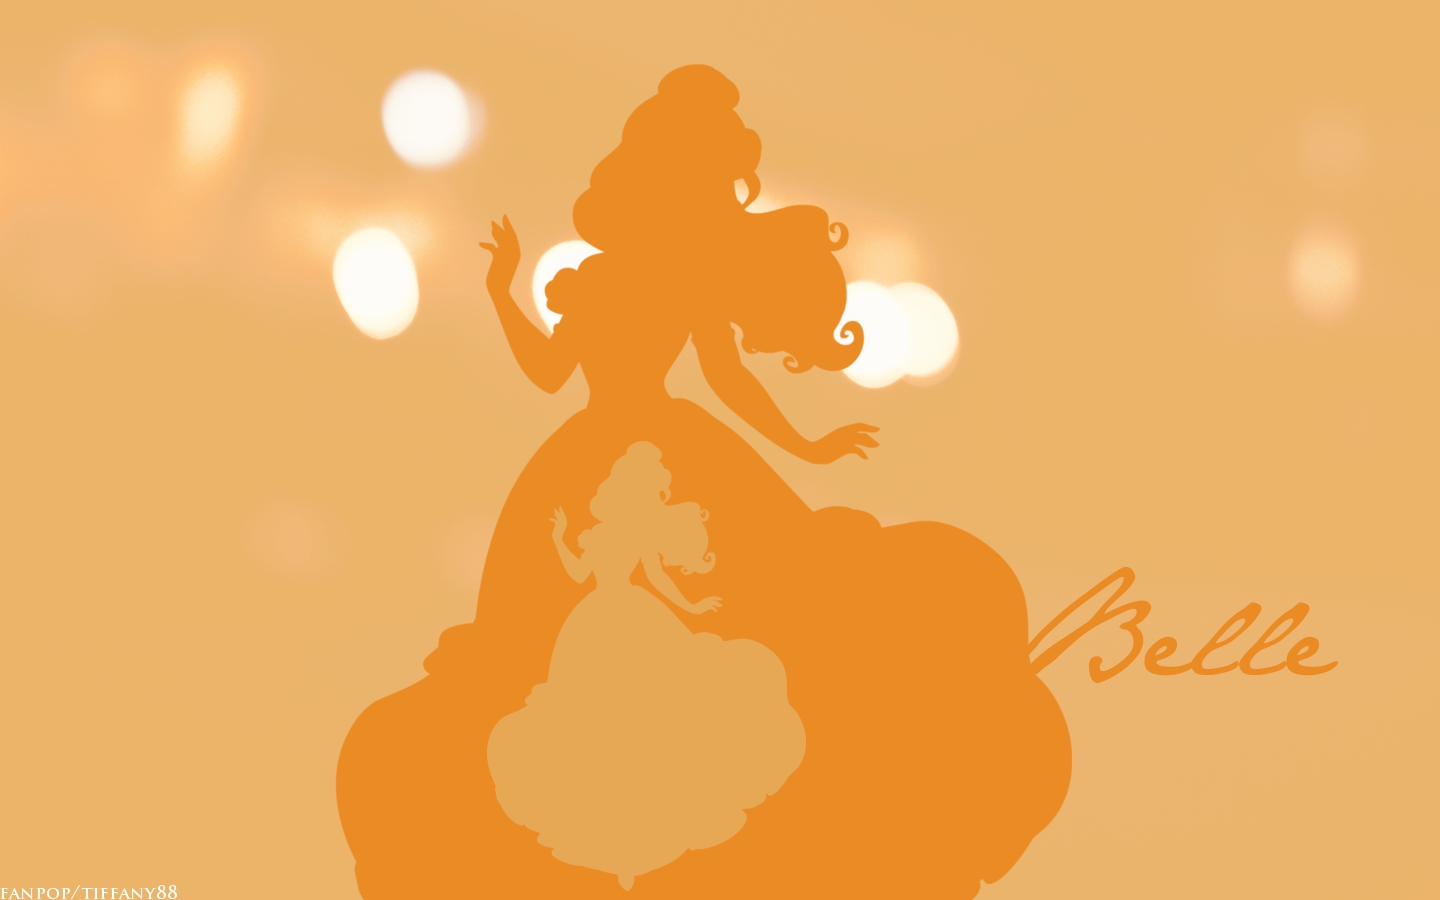 Tangled Minimalist Poster Wallpapers